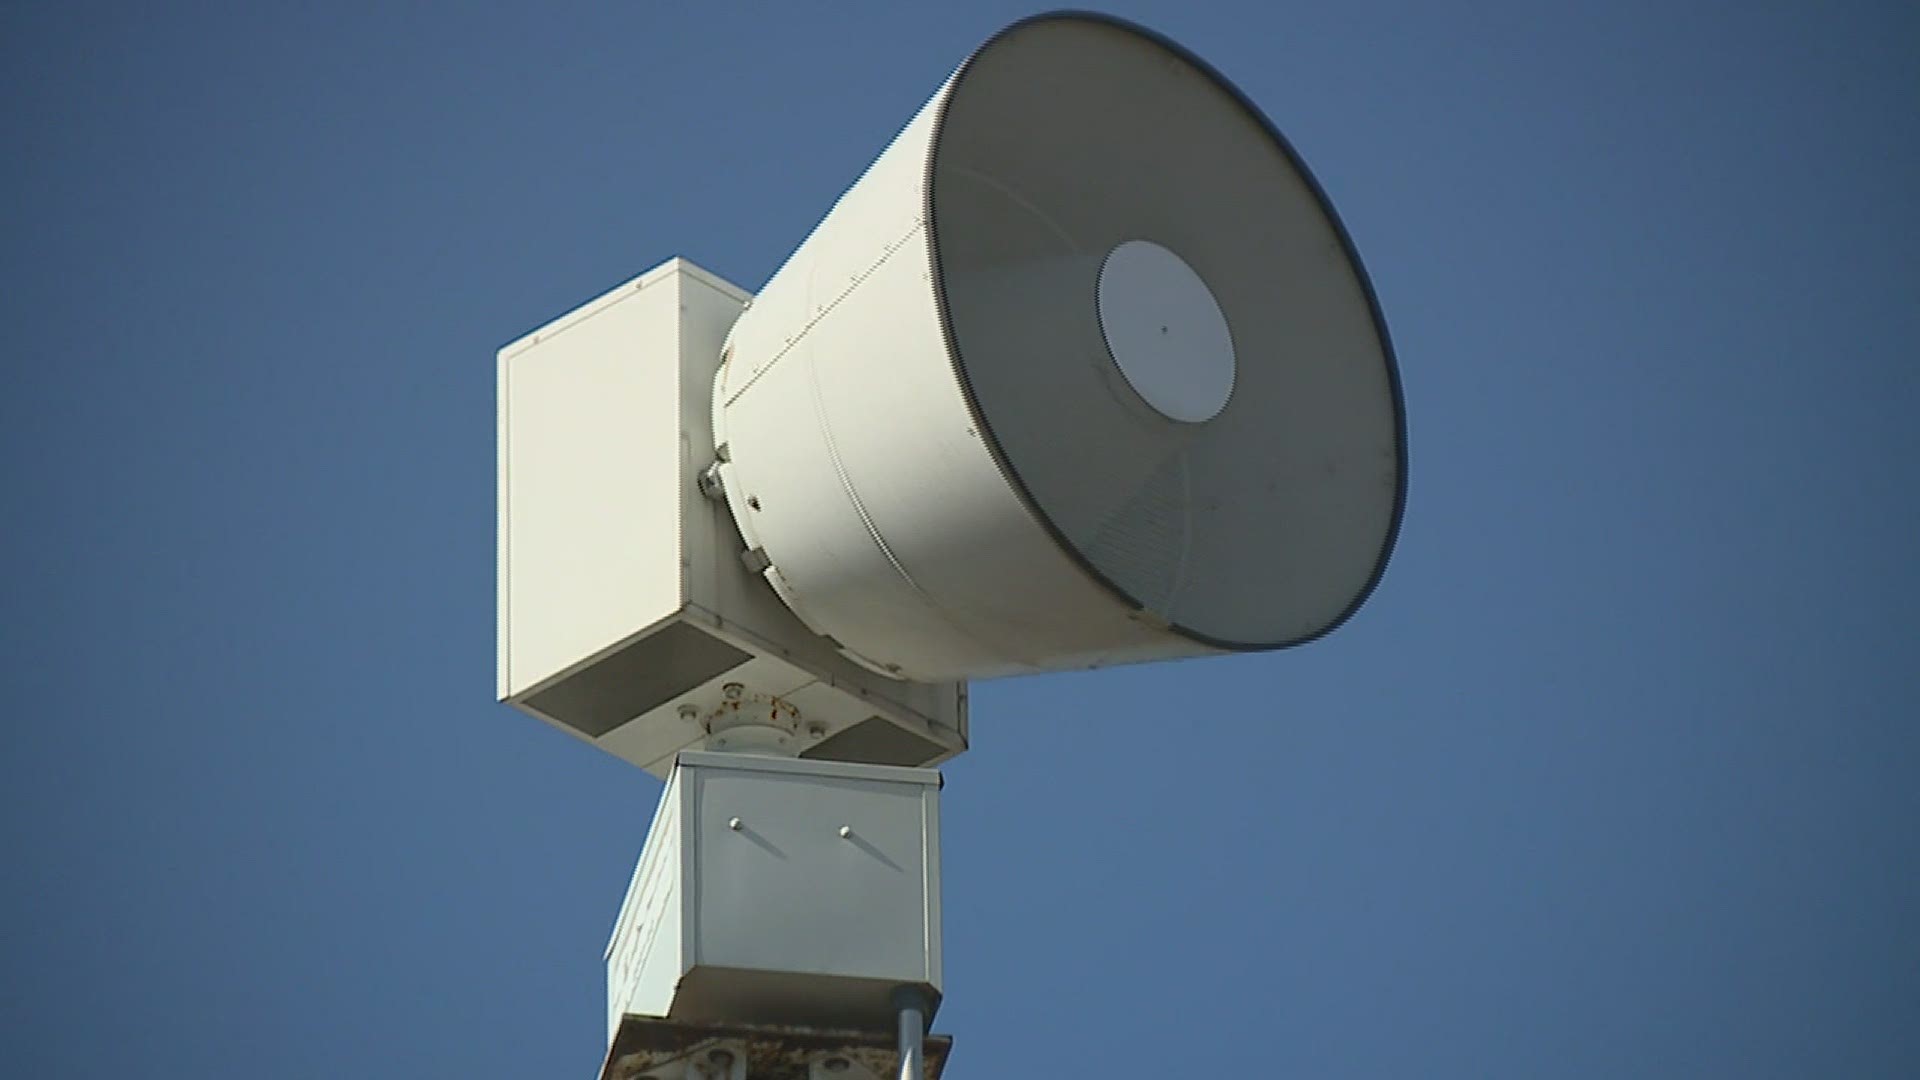 The sirens usually only sound when there's a storm with winds above 70 mph. Starting July 30, they'll sound for any severe thunderstorm warning.